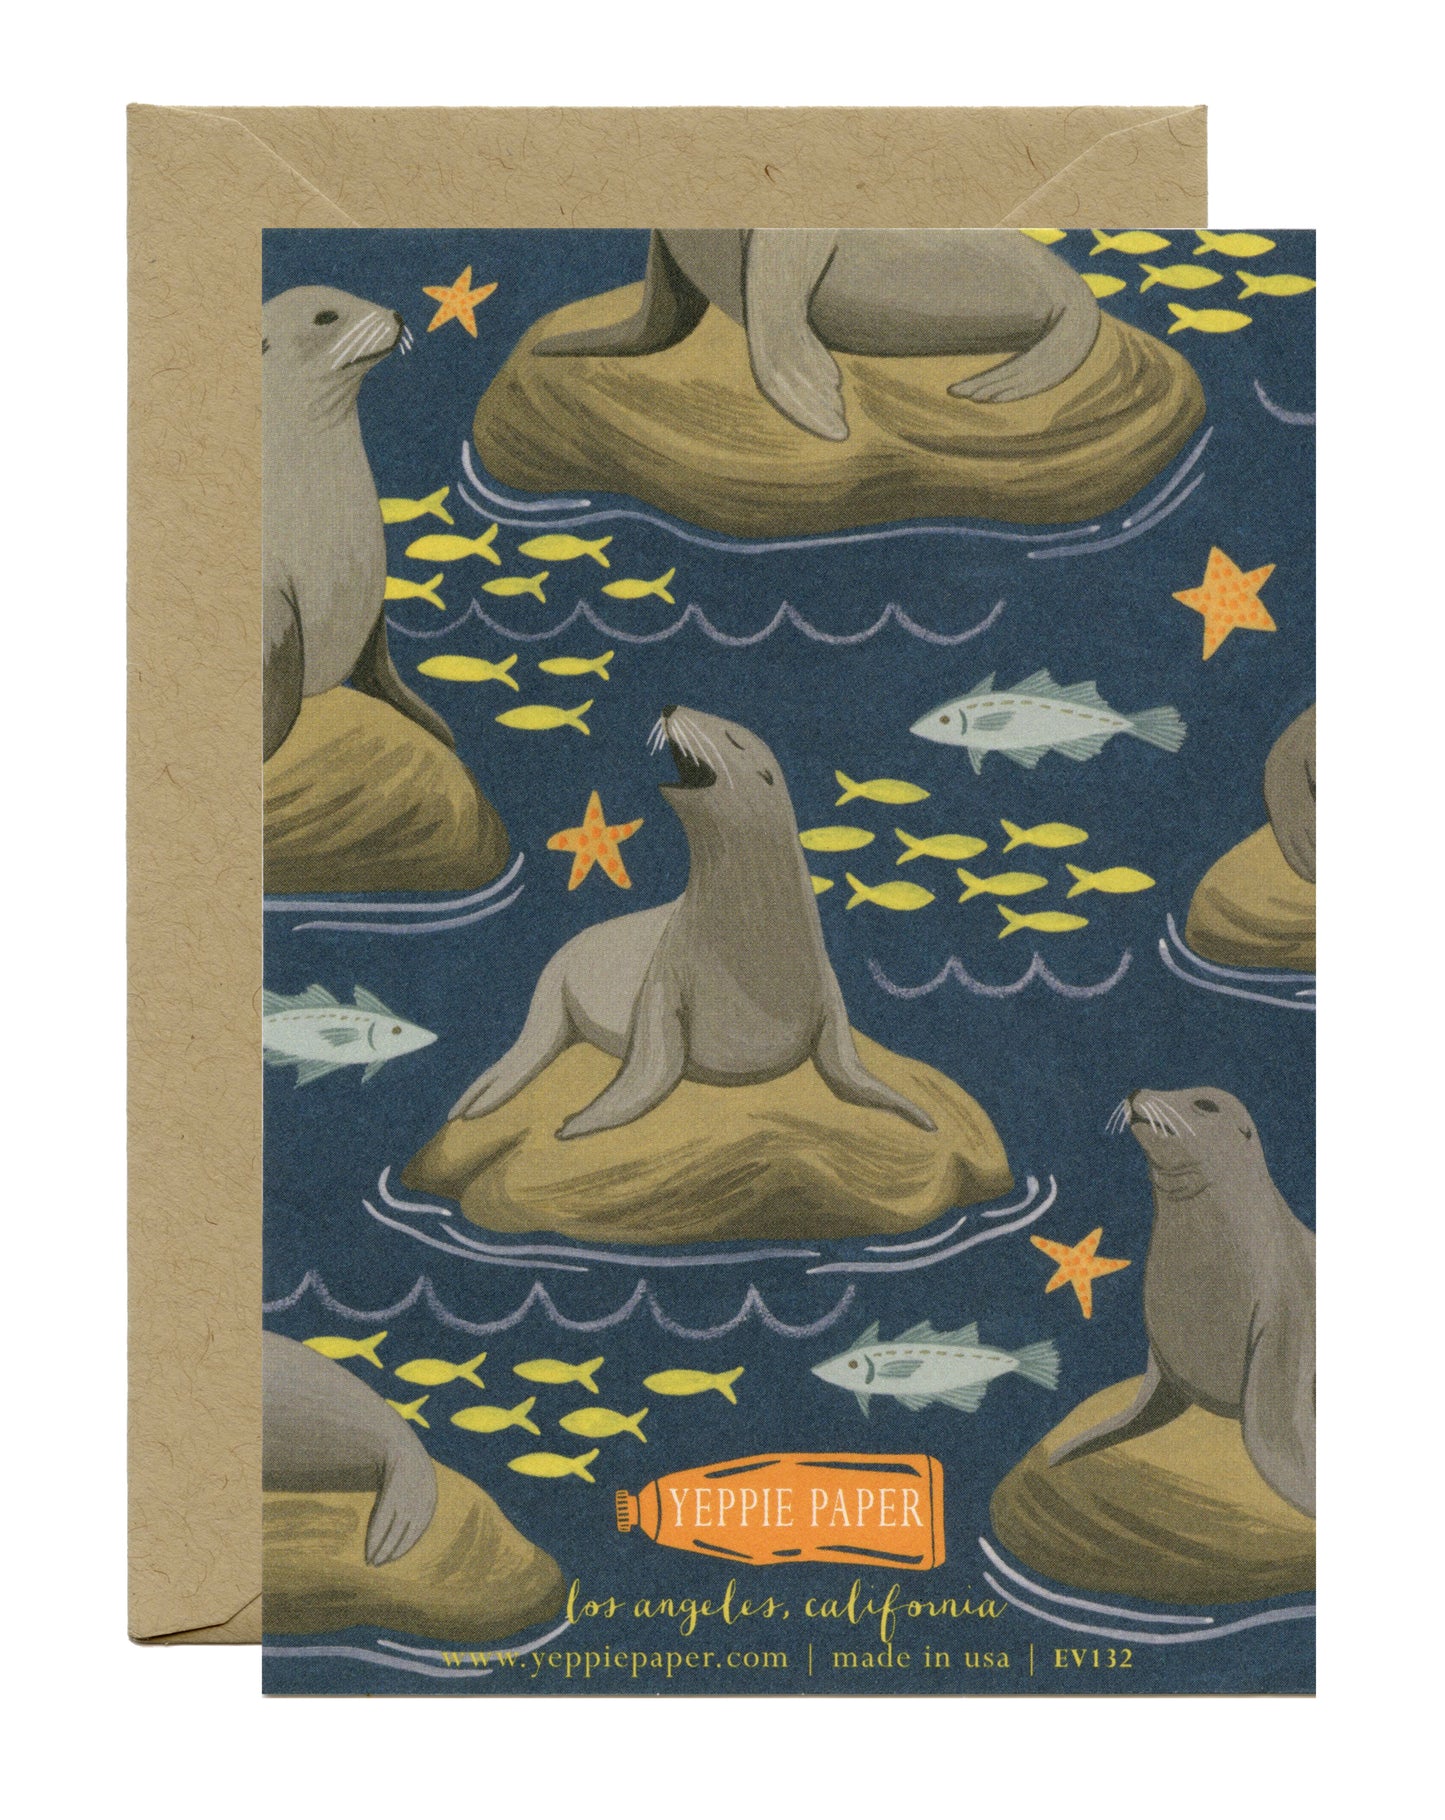 EVERYDAY SEA LIONS AND FISH - BLANK GREETING CARD